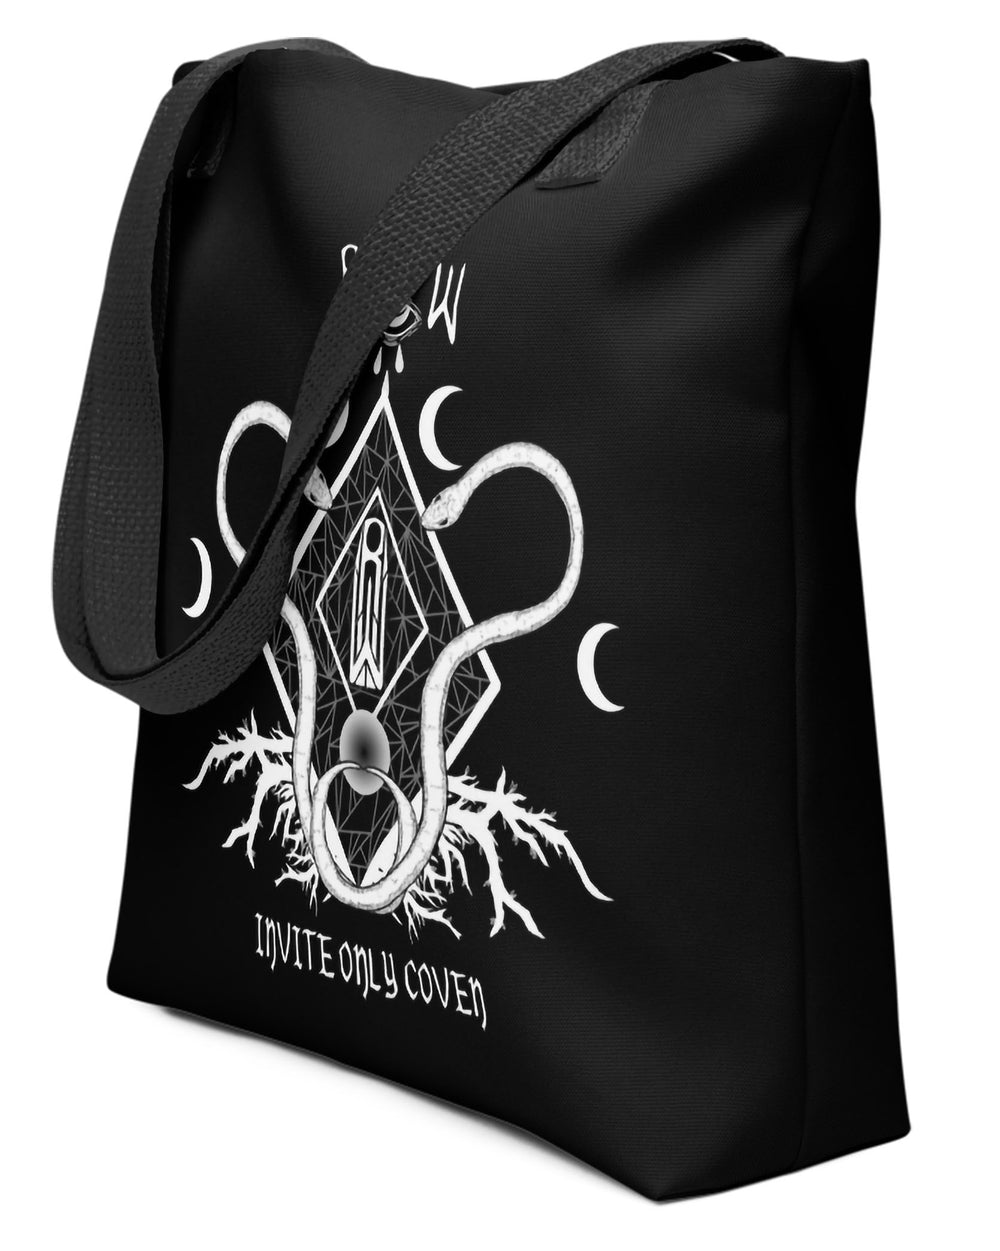 Coven Tote Bag - Cotton Vegan Bag for Women Large Foldable Bag Work Gym Travel Shopping Grocery Goth Accessories